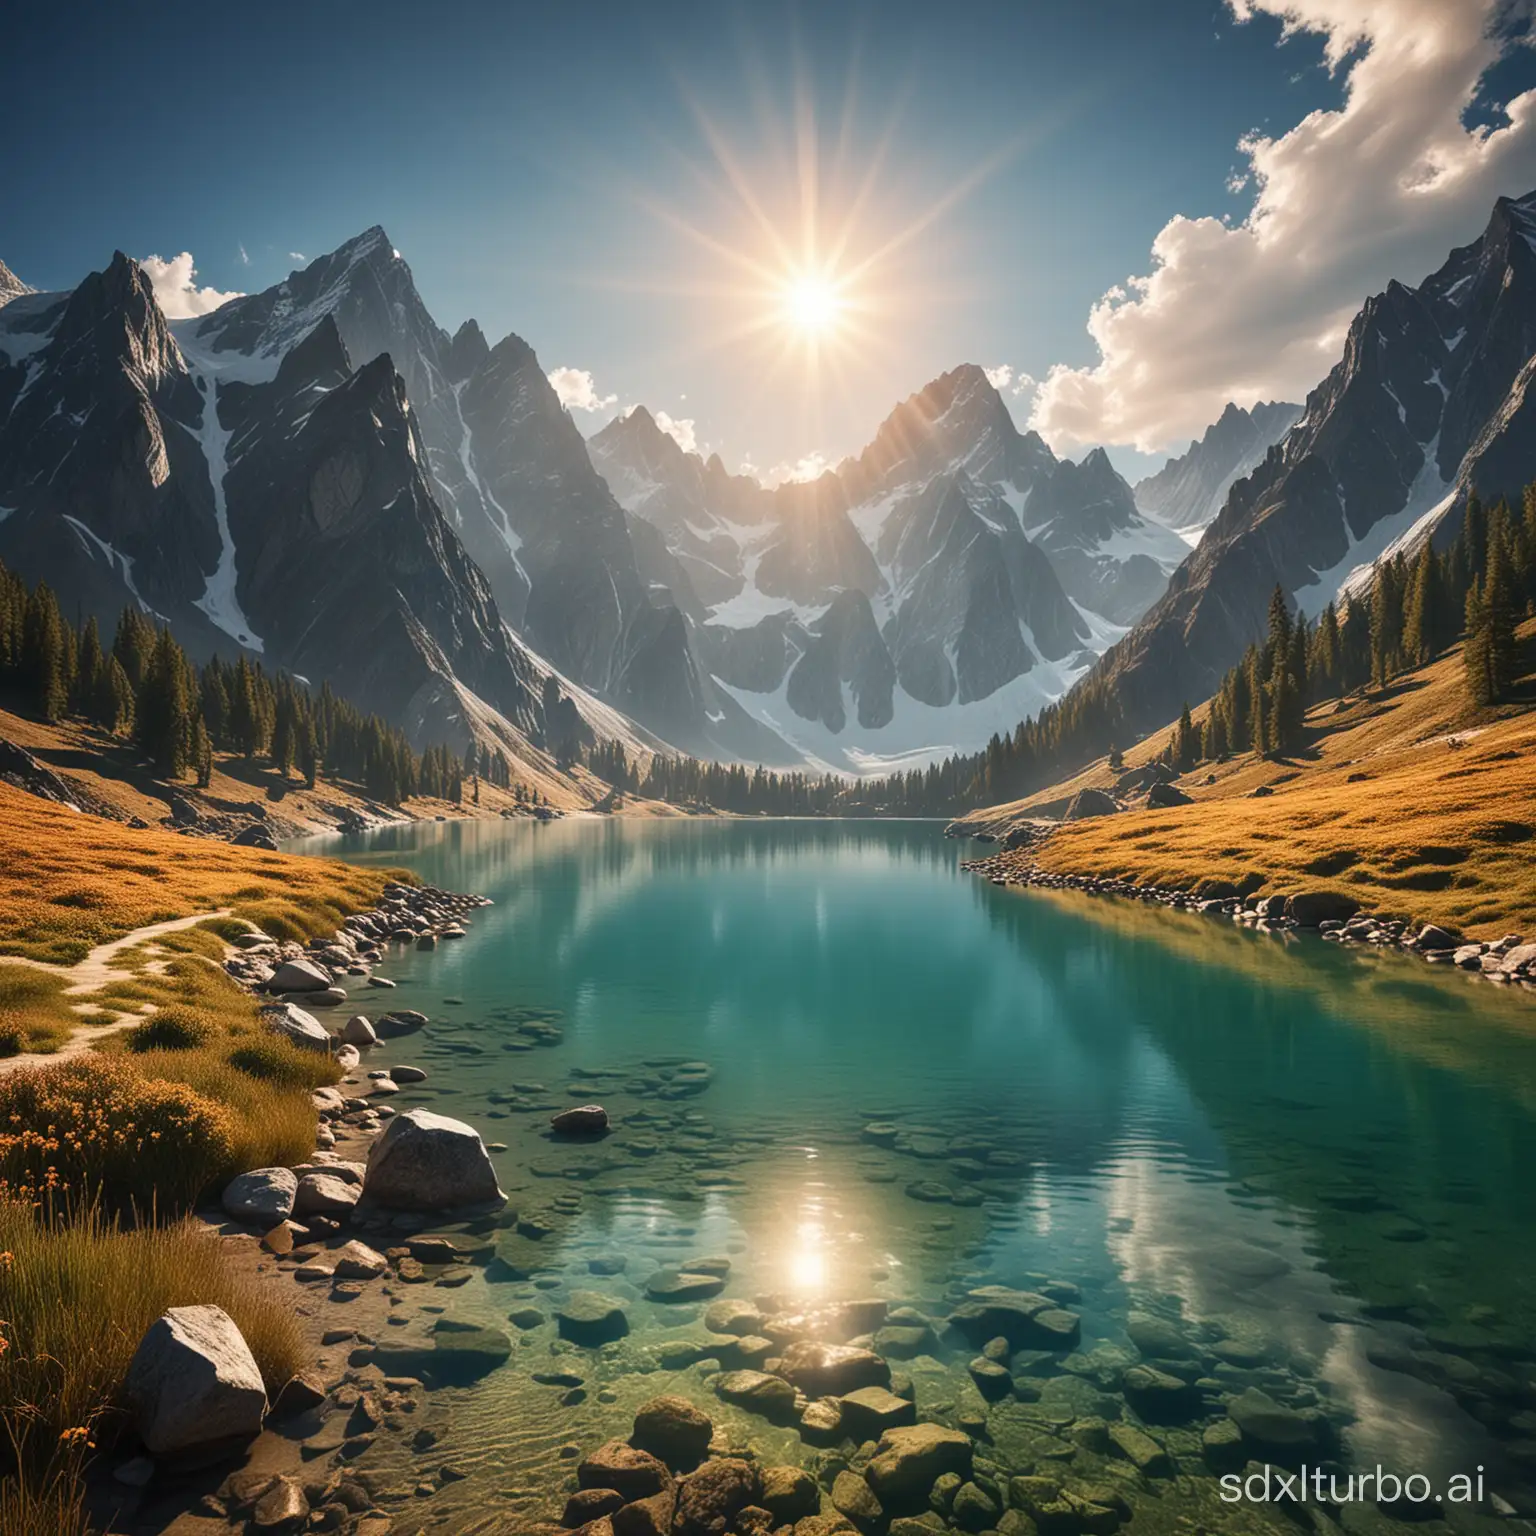 mountain with lake in front with a sun shining beautiful fantasy